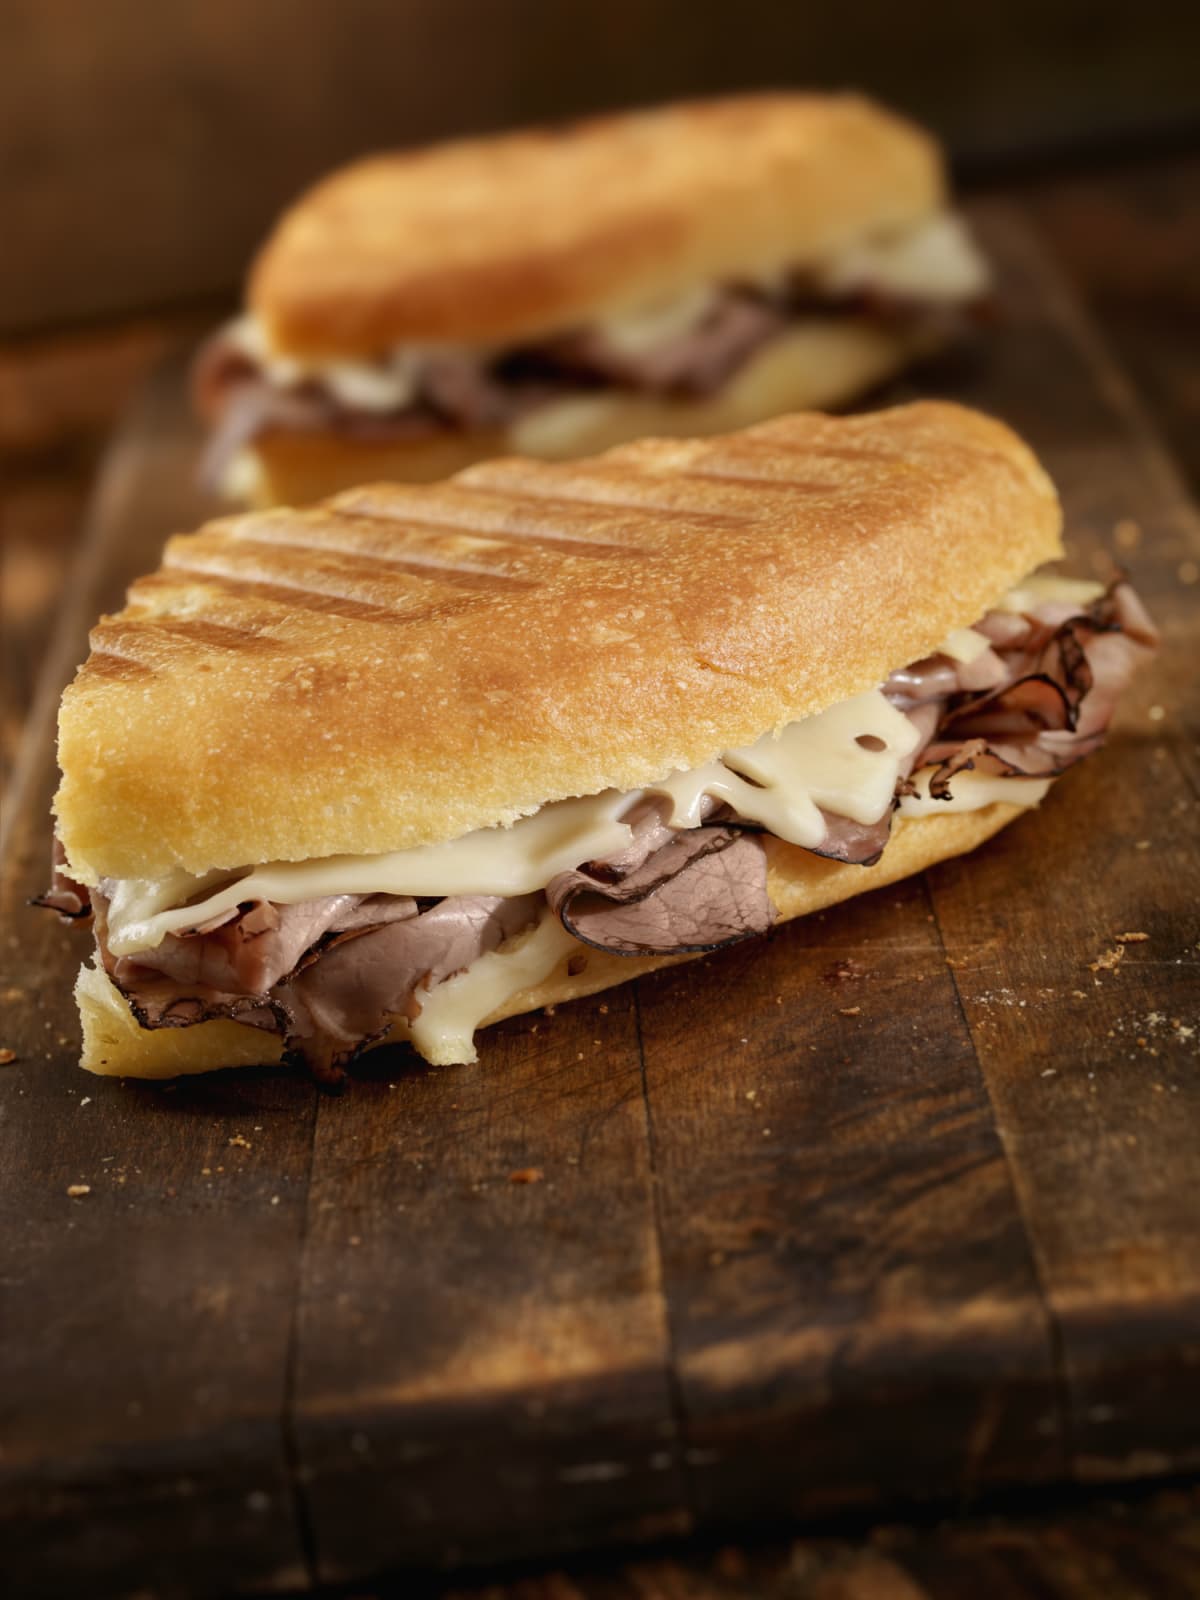 Roast Beef and Swiss Panini on Focaccia Bread- Photographed on Hasselblad H3D2-39mb Camera